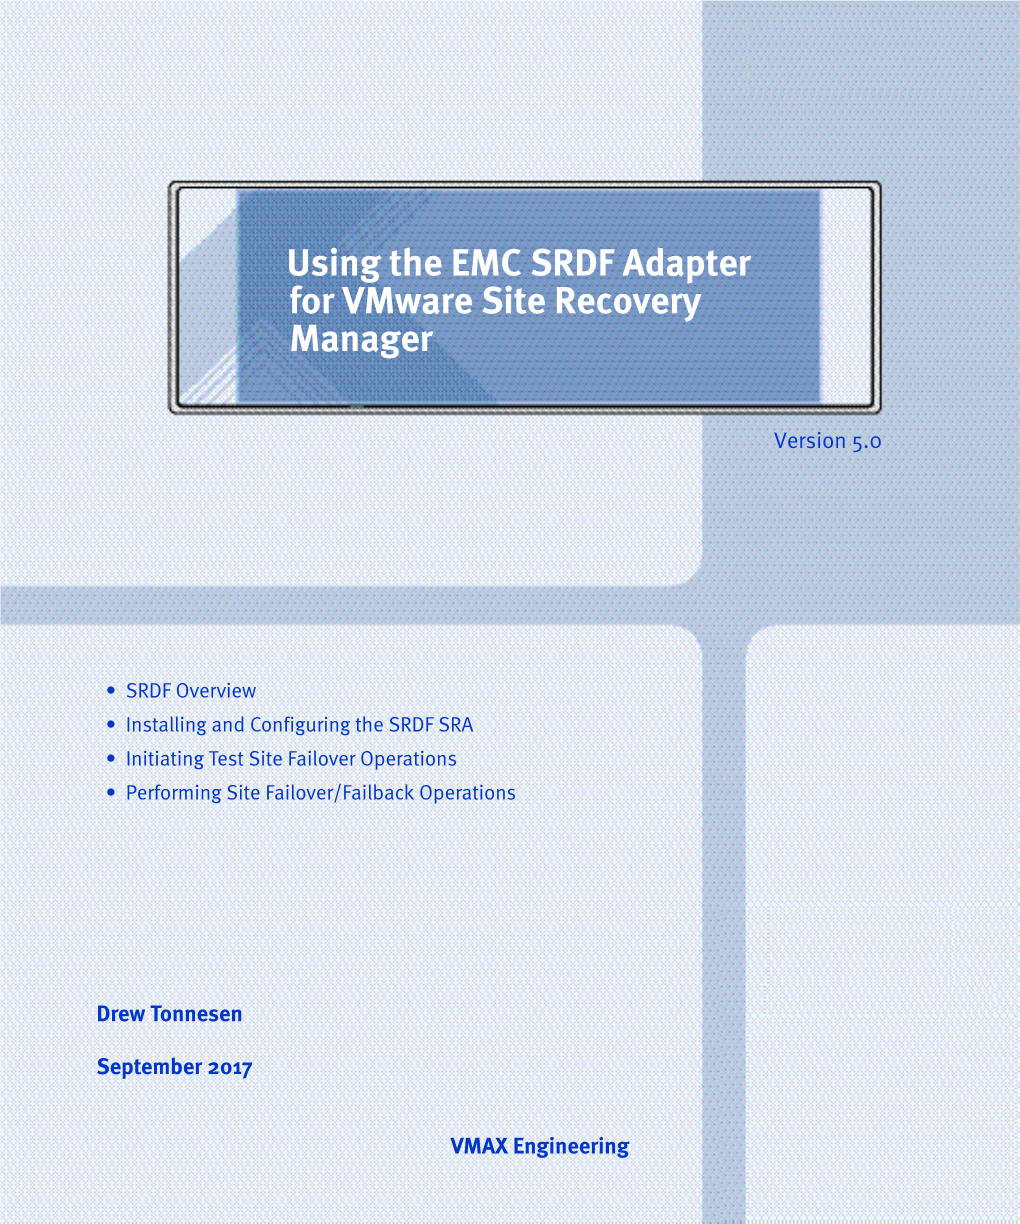 Using the EMC SRDF Adapter for Vmware Site Recovery Manager